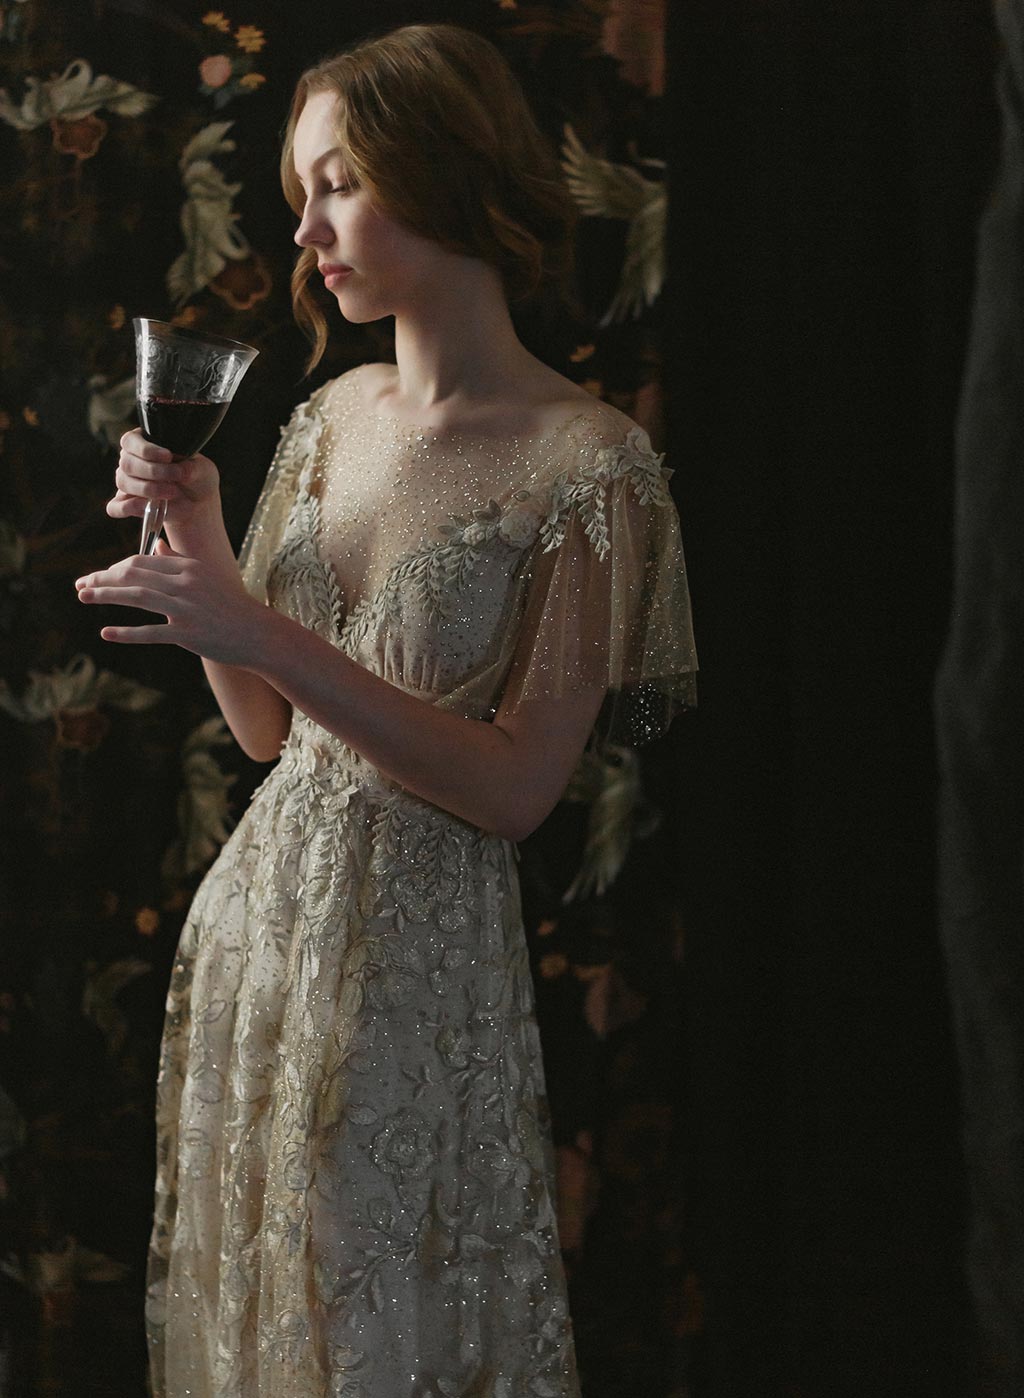 Soleil Couture Wedding Embroidered Wedding Dress Claire Pettibone